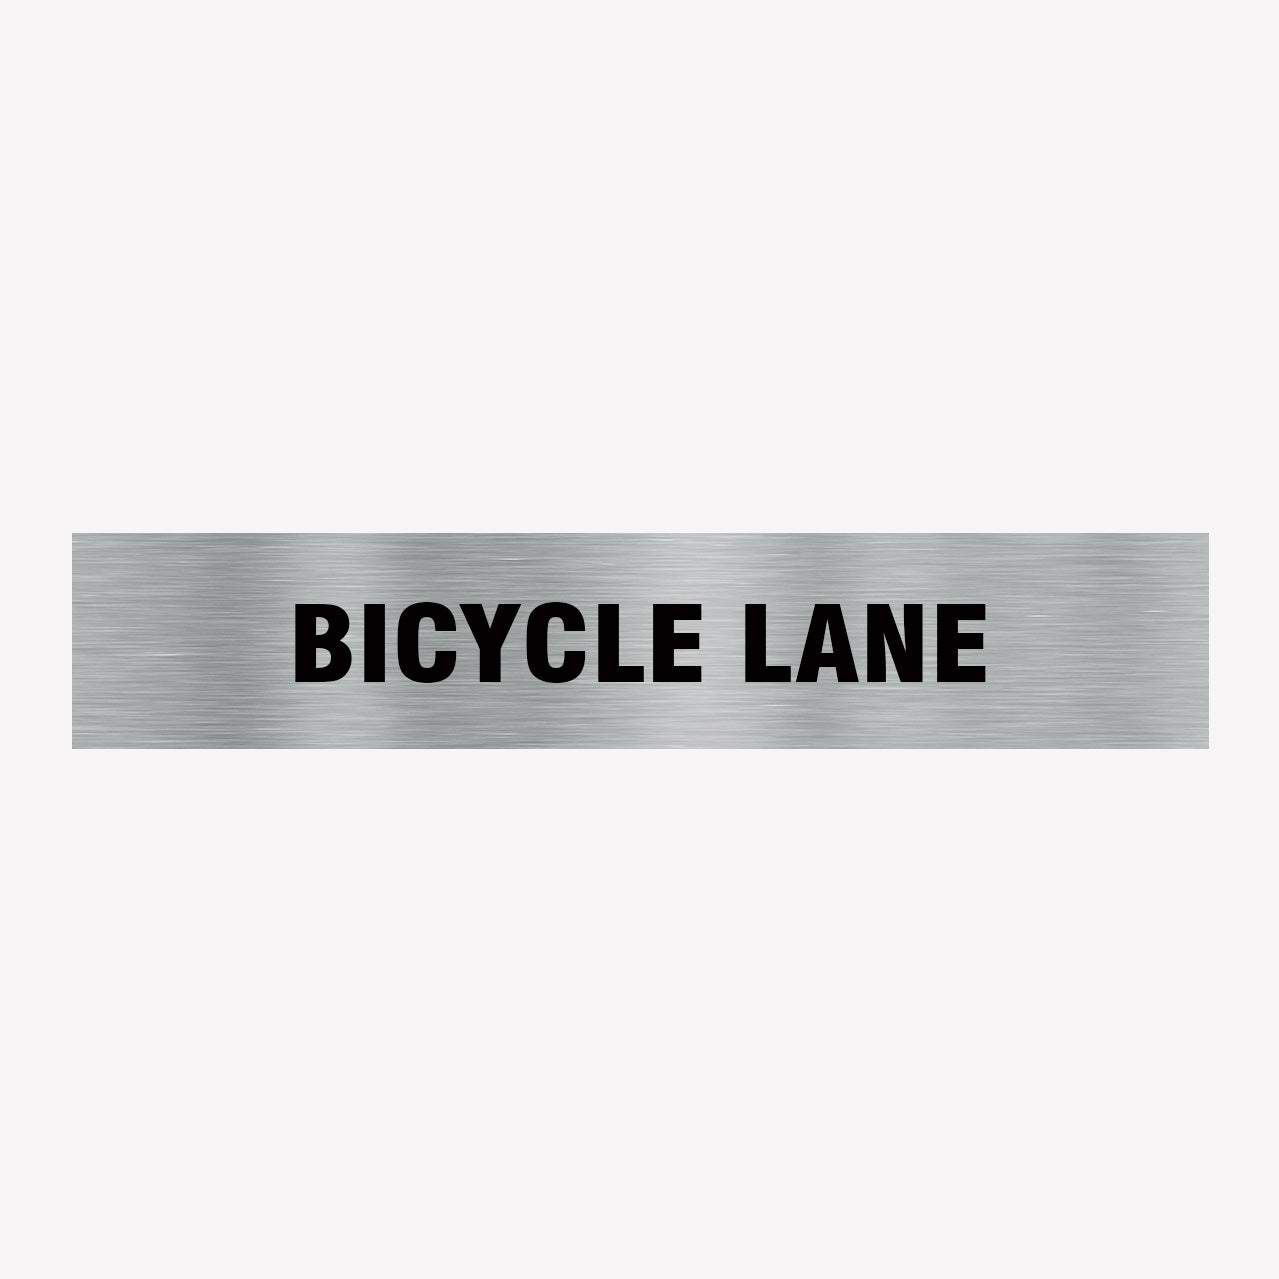 BICYCLE LANE SIGN - STATUTORY SIGNS - GET SIGNS